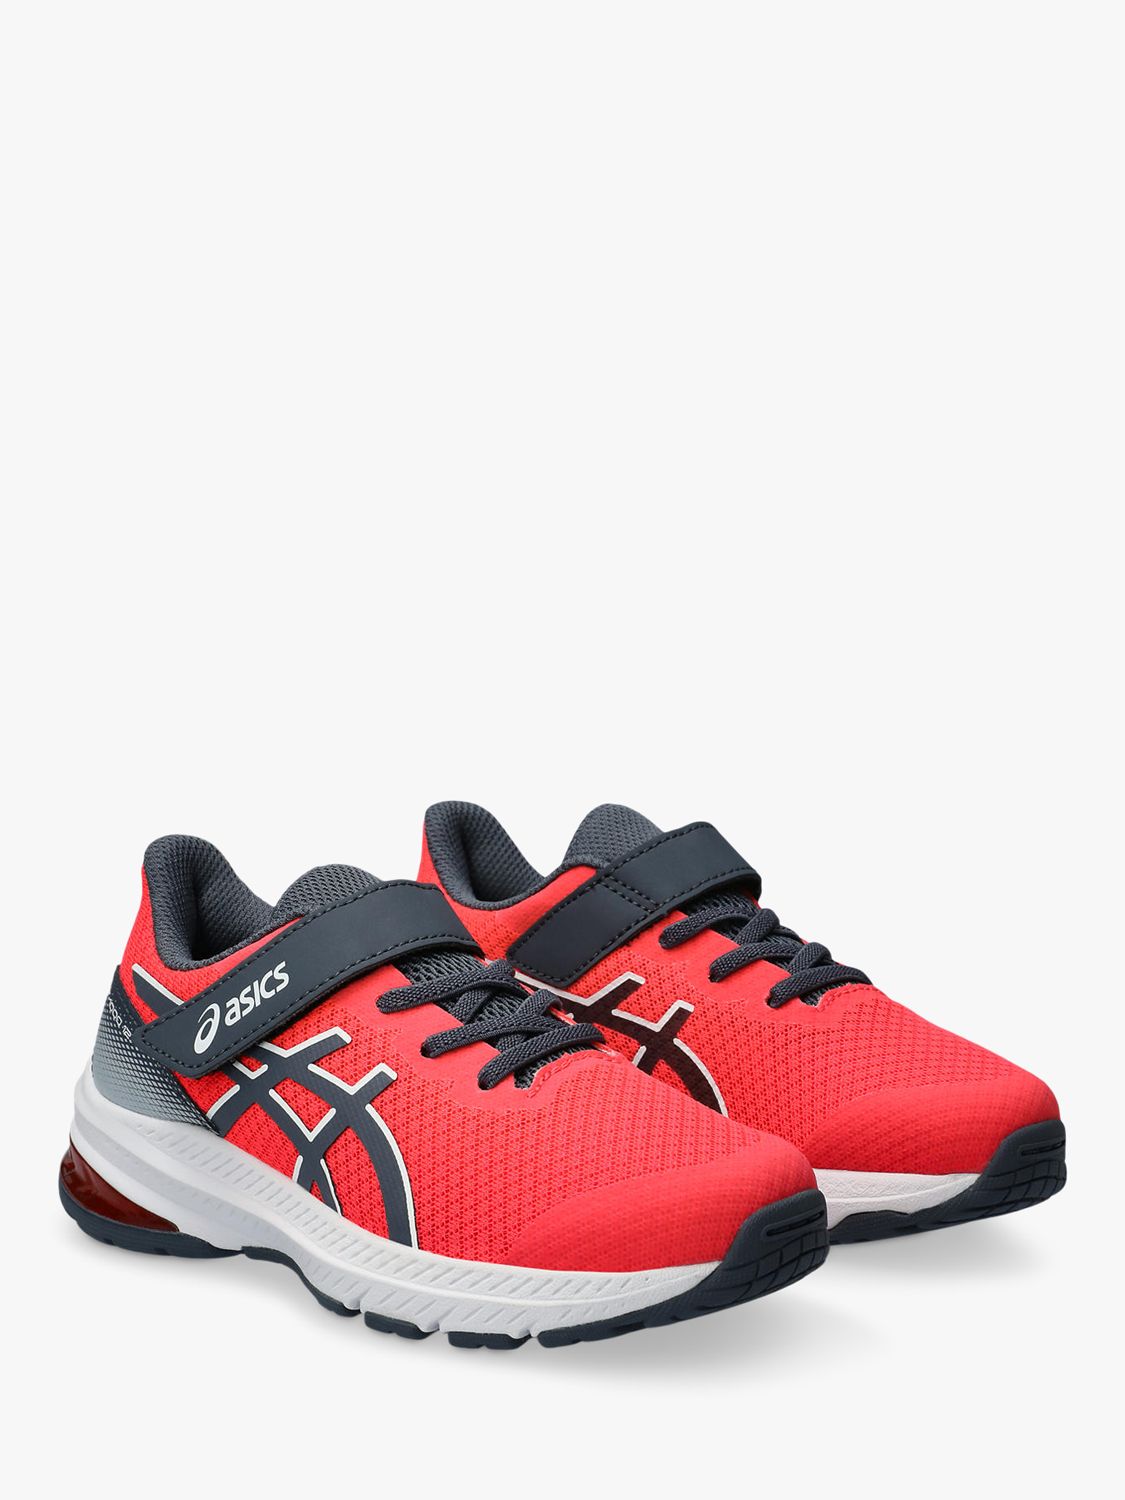 ASICS Kids' GT 1000-12 PS Running Shoes, Red, 10 Jnr